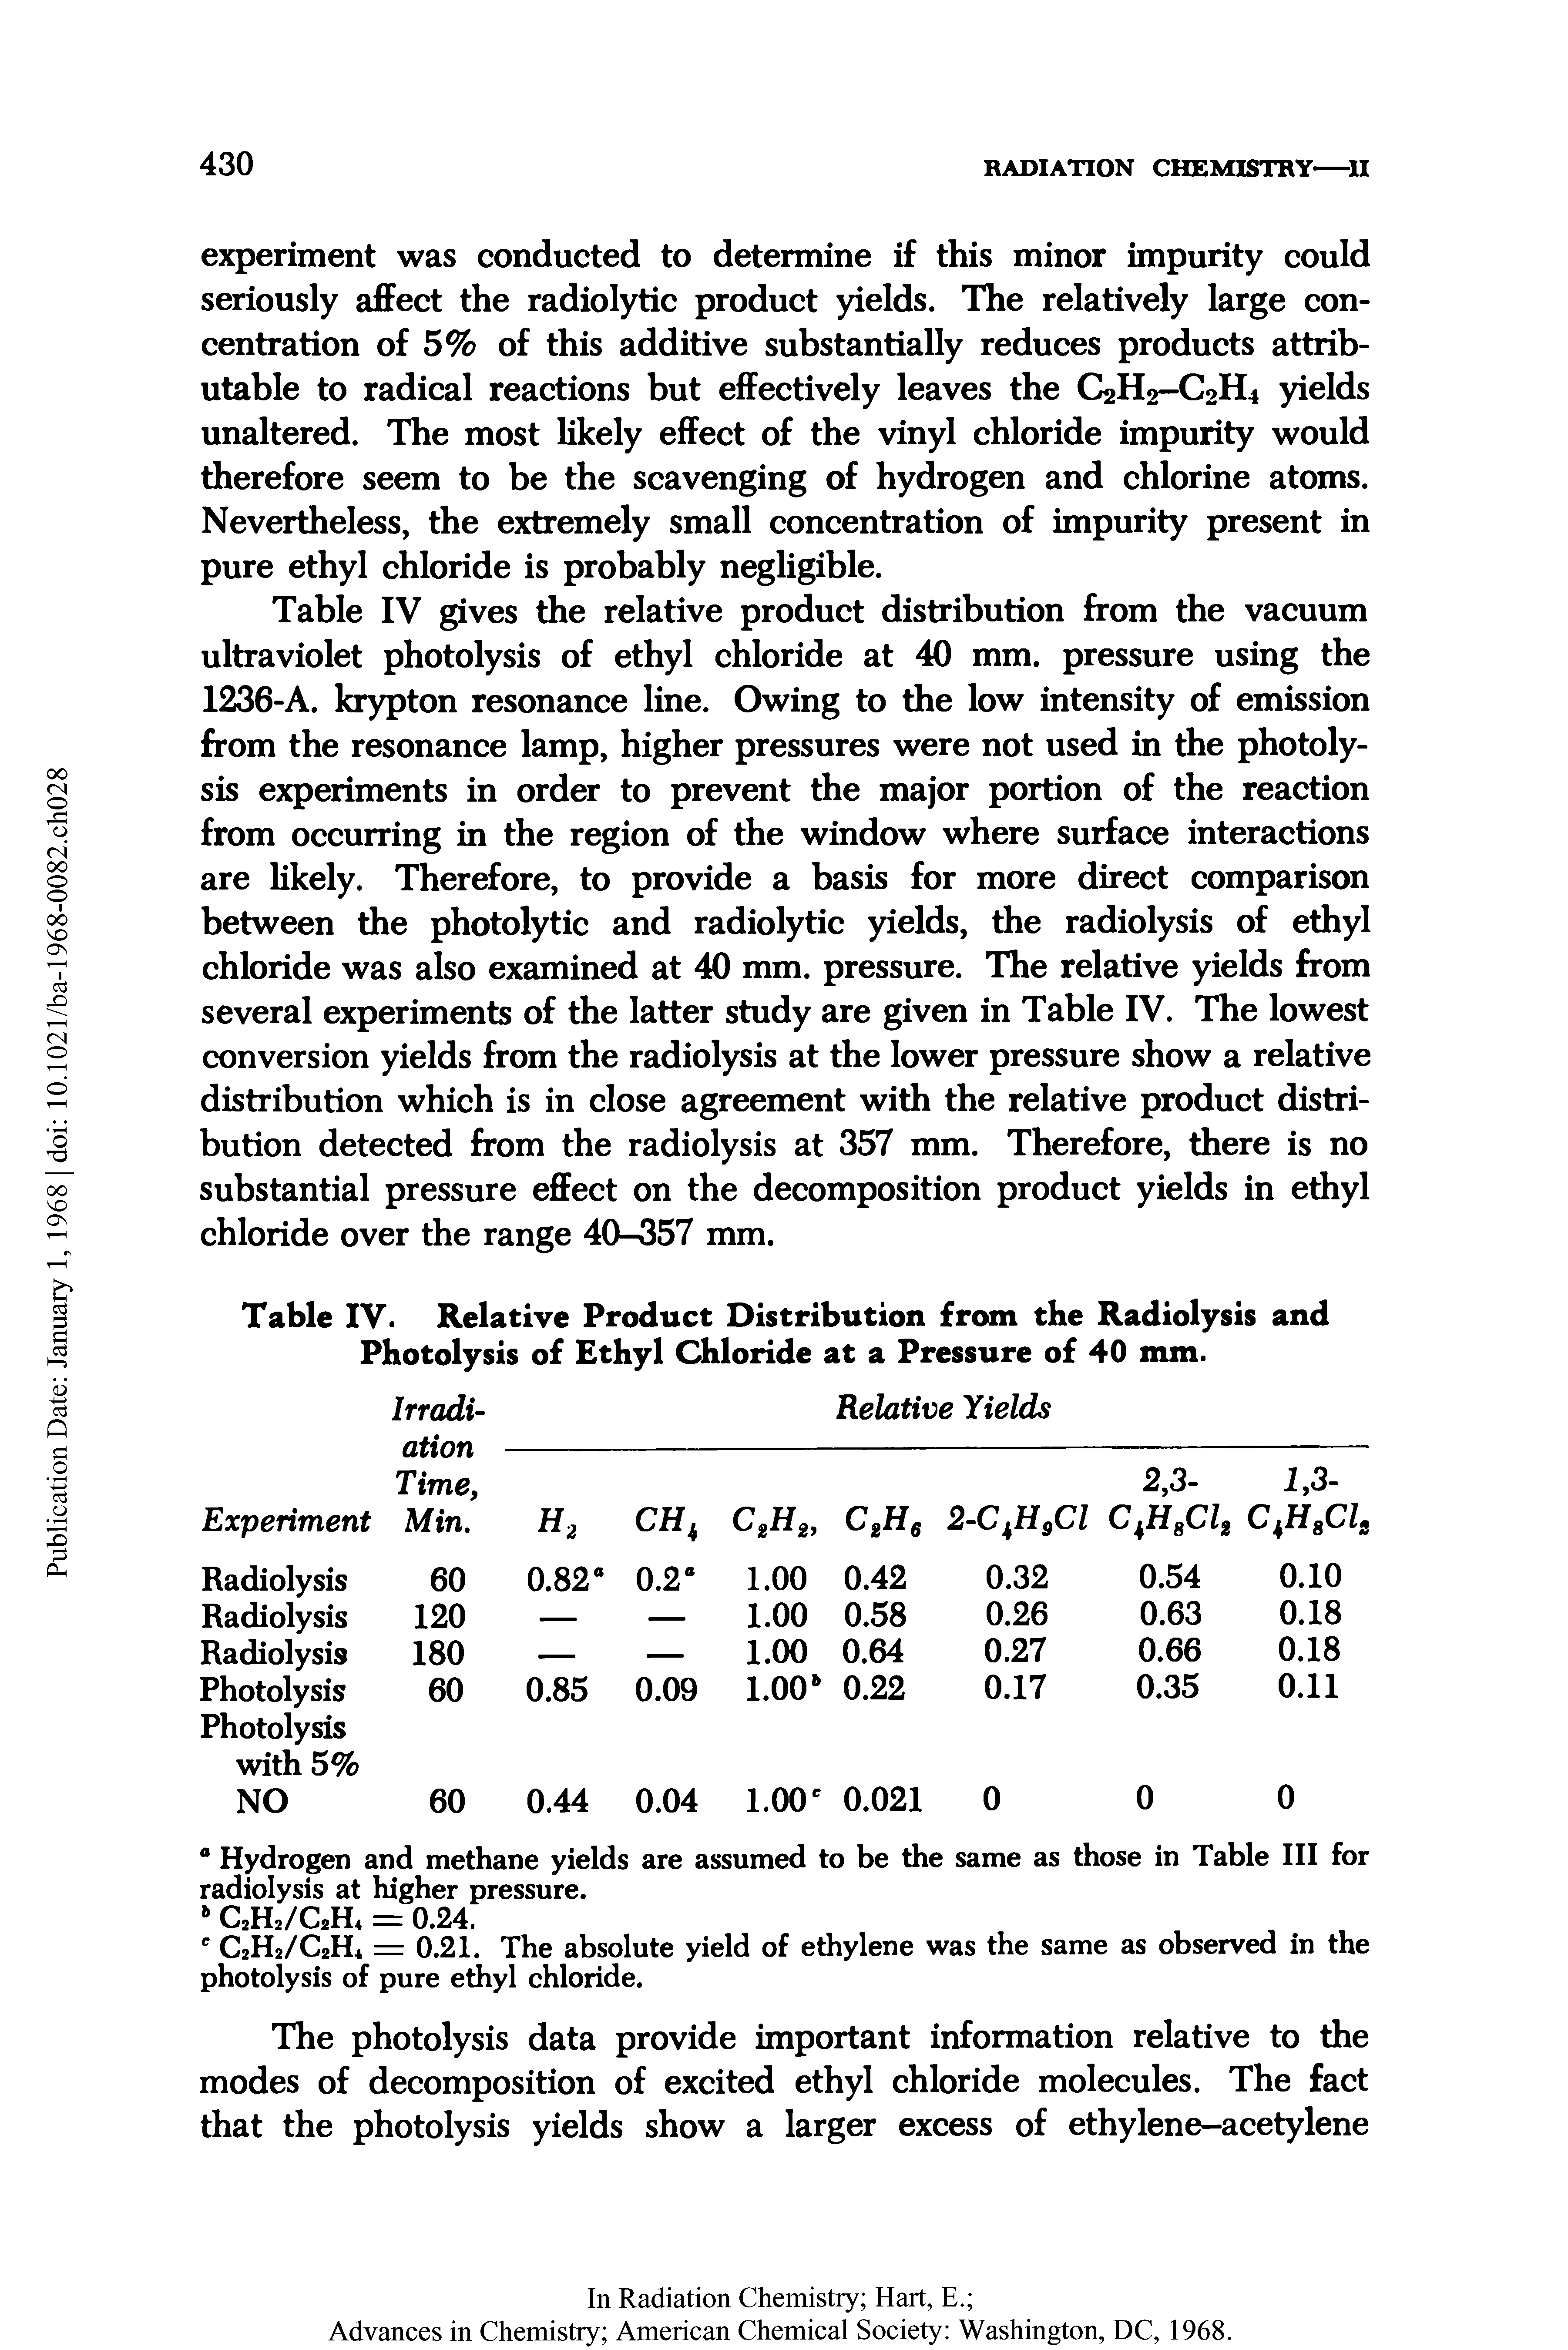 Table IV gives the relative product distribution from the vacuum ultraviolet photolysis of ethyl chloride at 40 mm. pressure using the 1236-A. krypton resonance line. Owing to the low intensity of emission from the resonance lamp, higher pressures were not used in the photolysis experiments in order to prevent the major portion of the reaction from occurring in the region of the window where surface interactions are likely. Therefore, to provide a basis for more direct comparison between the photolytic and radiolytic yields, the radiolysis of ethyl chloride was also examined at 40 mm. pressure. The relative yields from several experiments of the latter study are given in Table IV. The lowest conversion yields from the radiolysis at the lower pressure show a relative distribution which is in close agreement with the relative product distribution detected from the radiolysis at 357 mm. Therefore, there is no substantial pressure effect on the decomposition product yields in ethyl chloride over the range 40-357 mm.